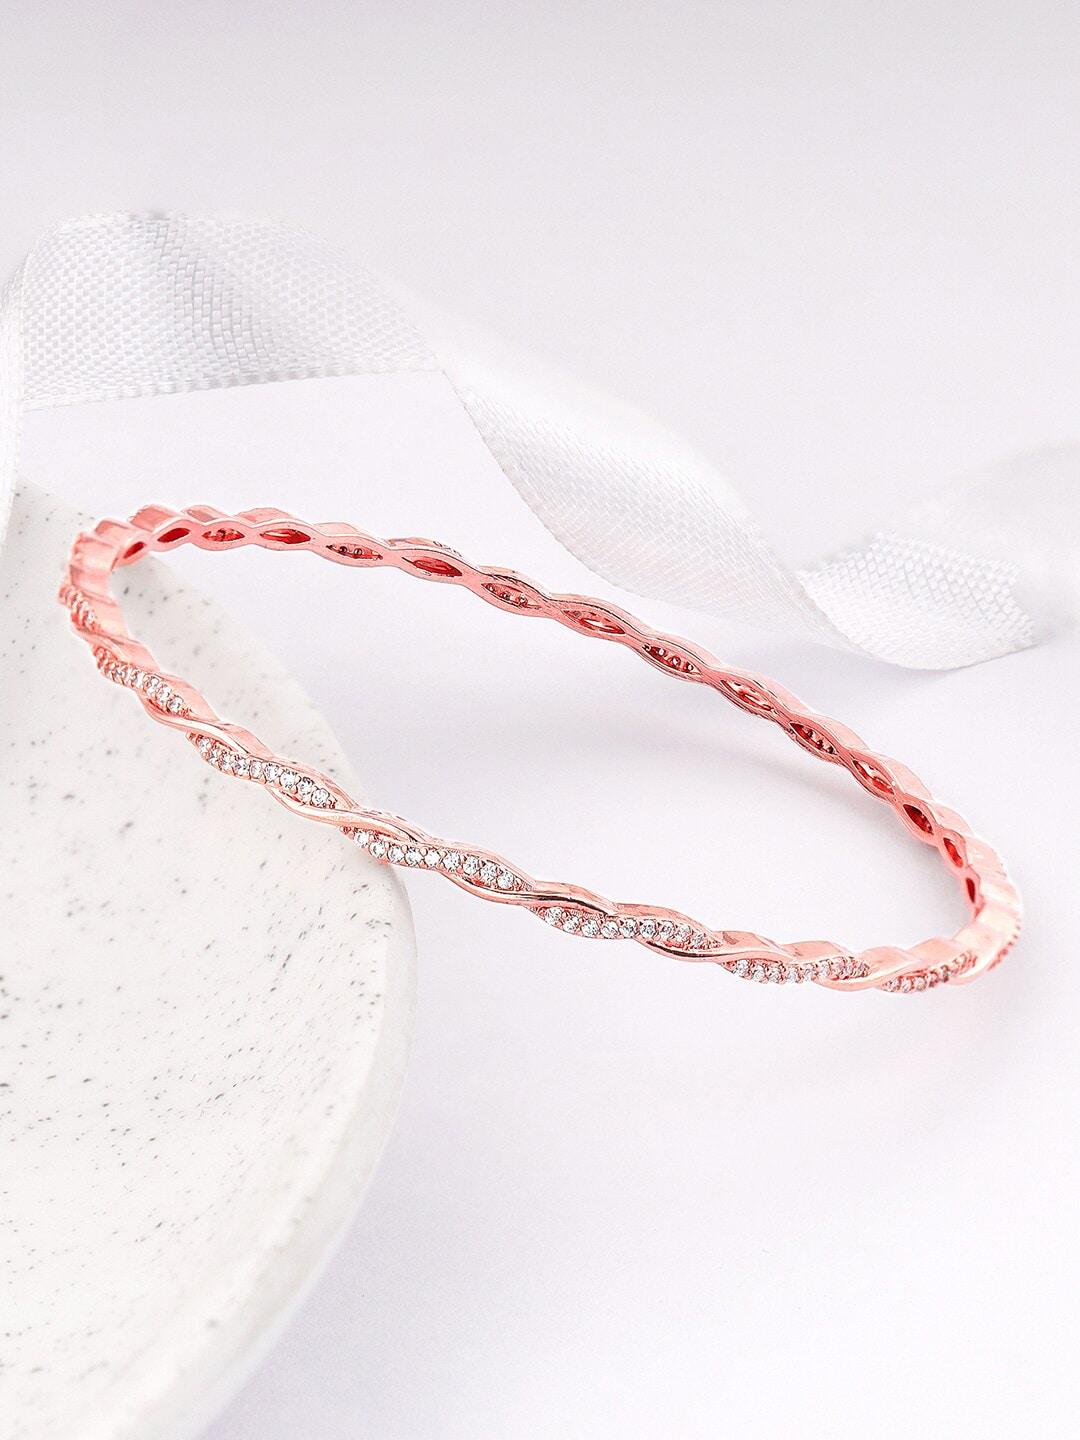 giva 925 sterling silver rose gold-plated stone-studded bangle